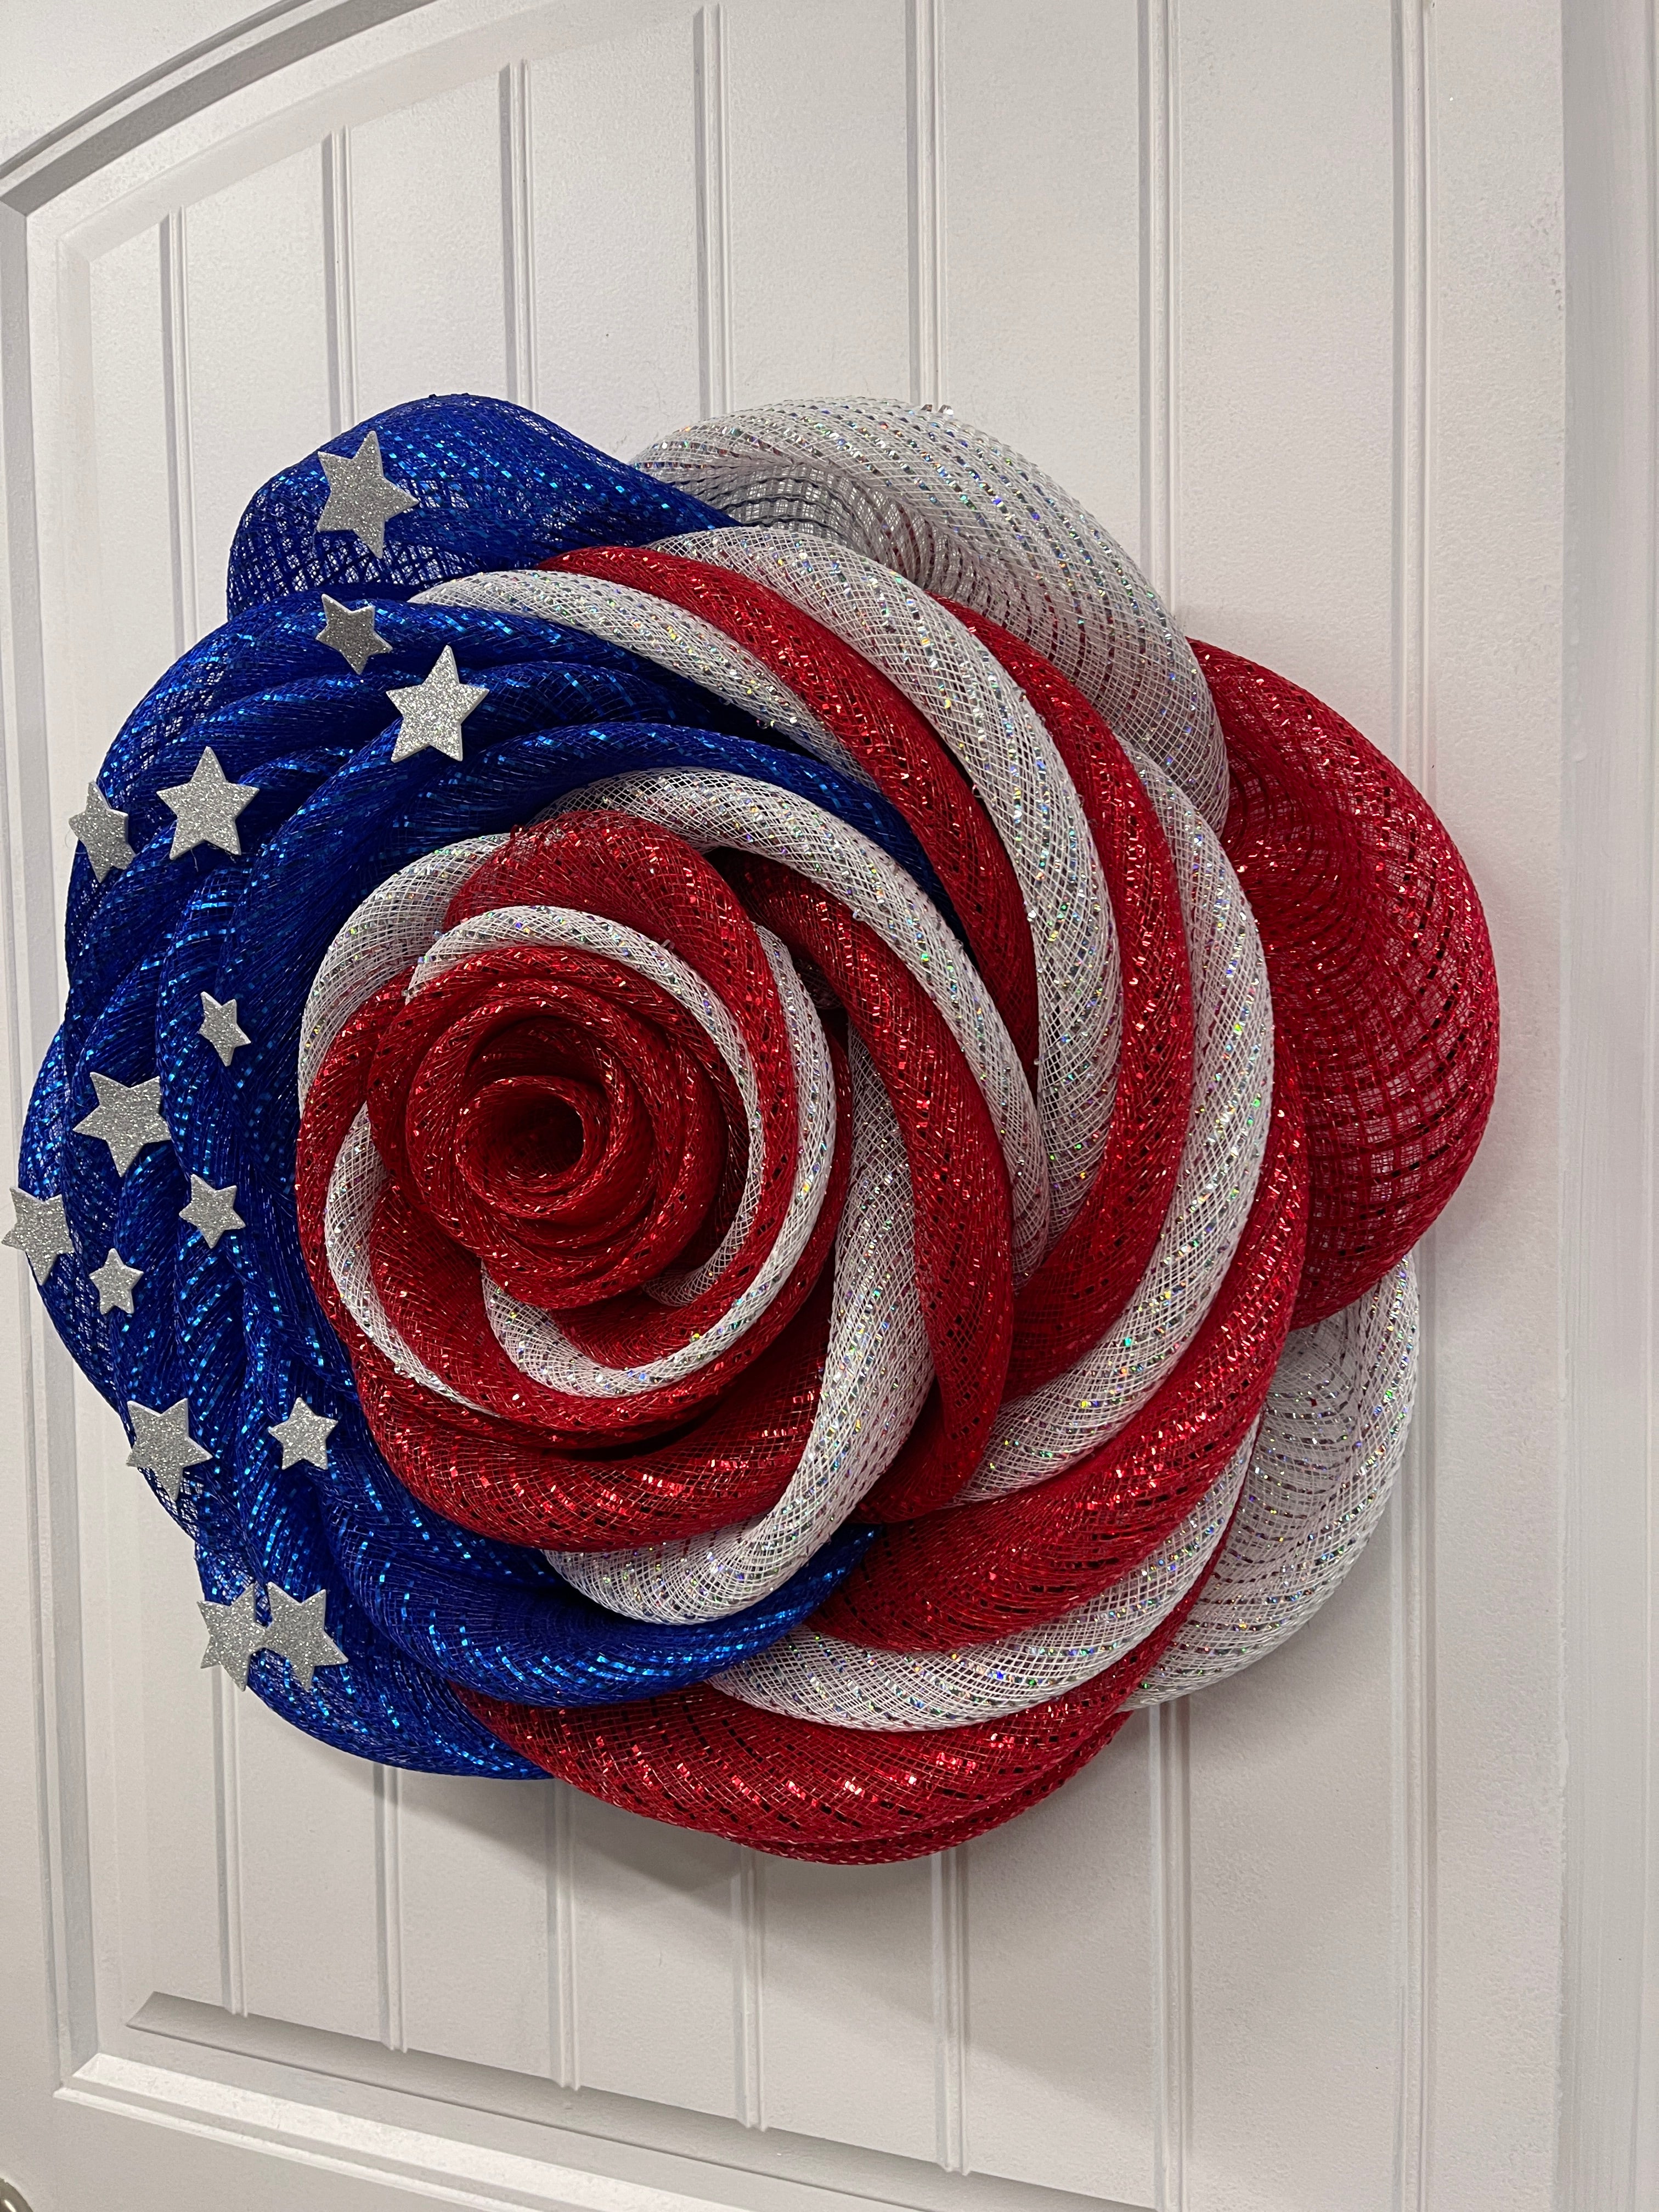 Right Side View of Red, White and Blue Deco Mesh Rose Flower Wreath with Silver Stars on a White Door